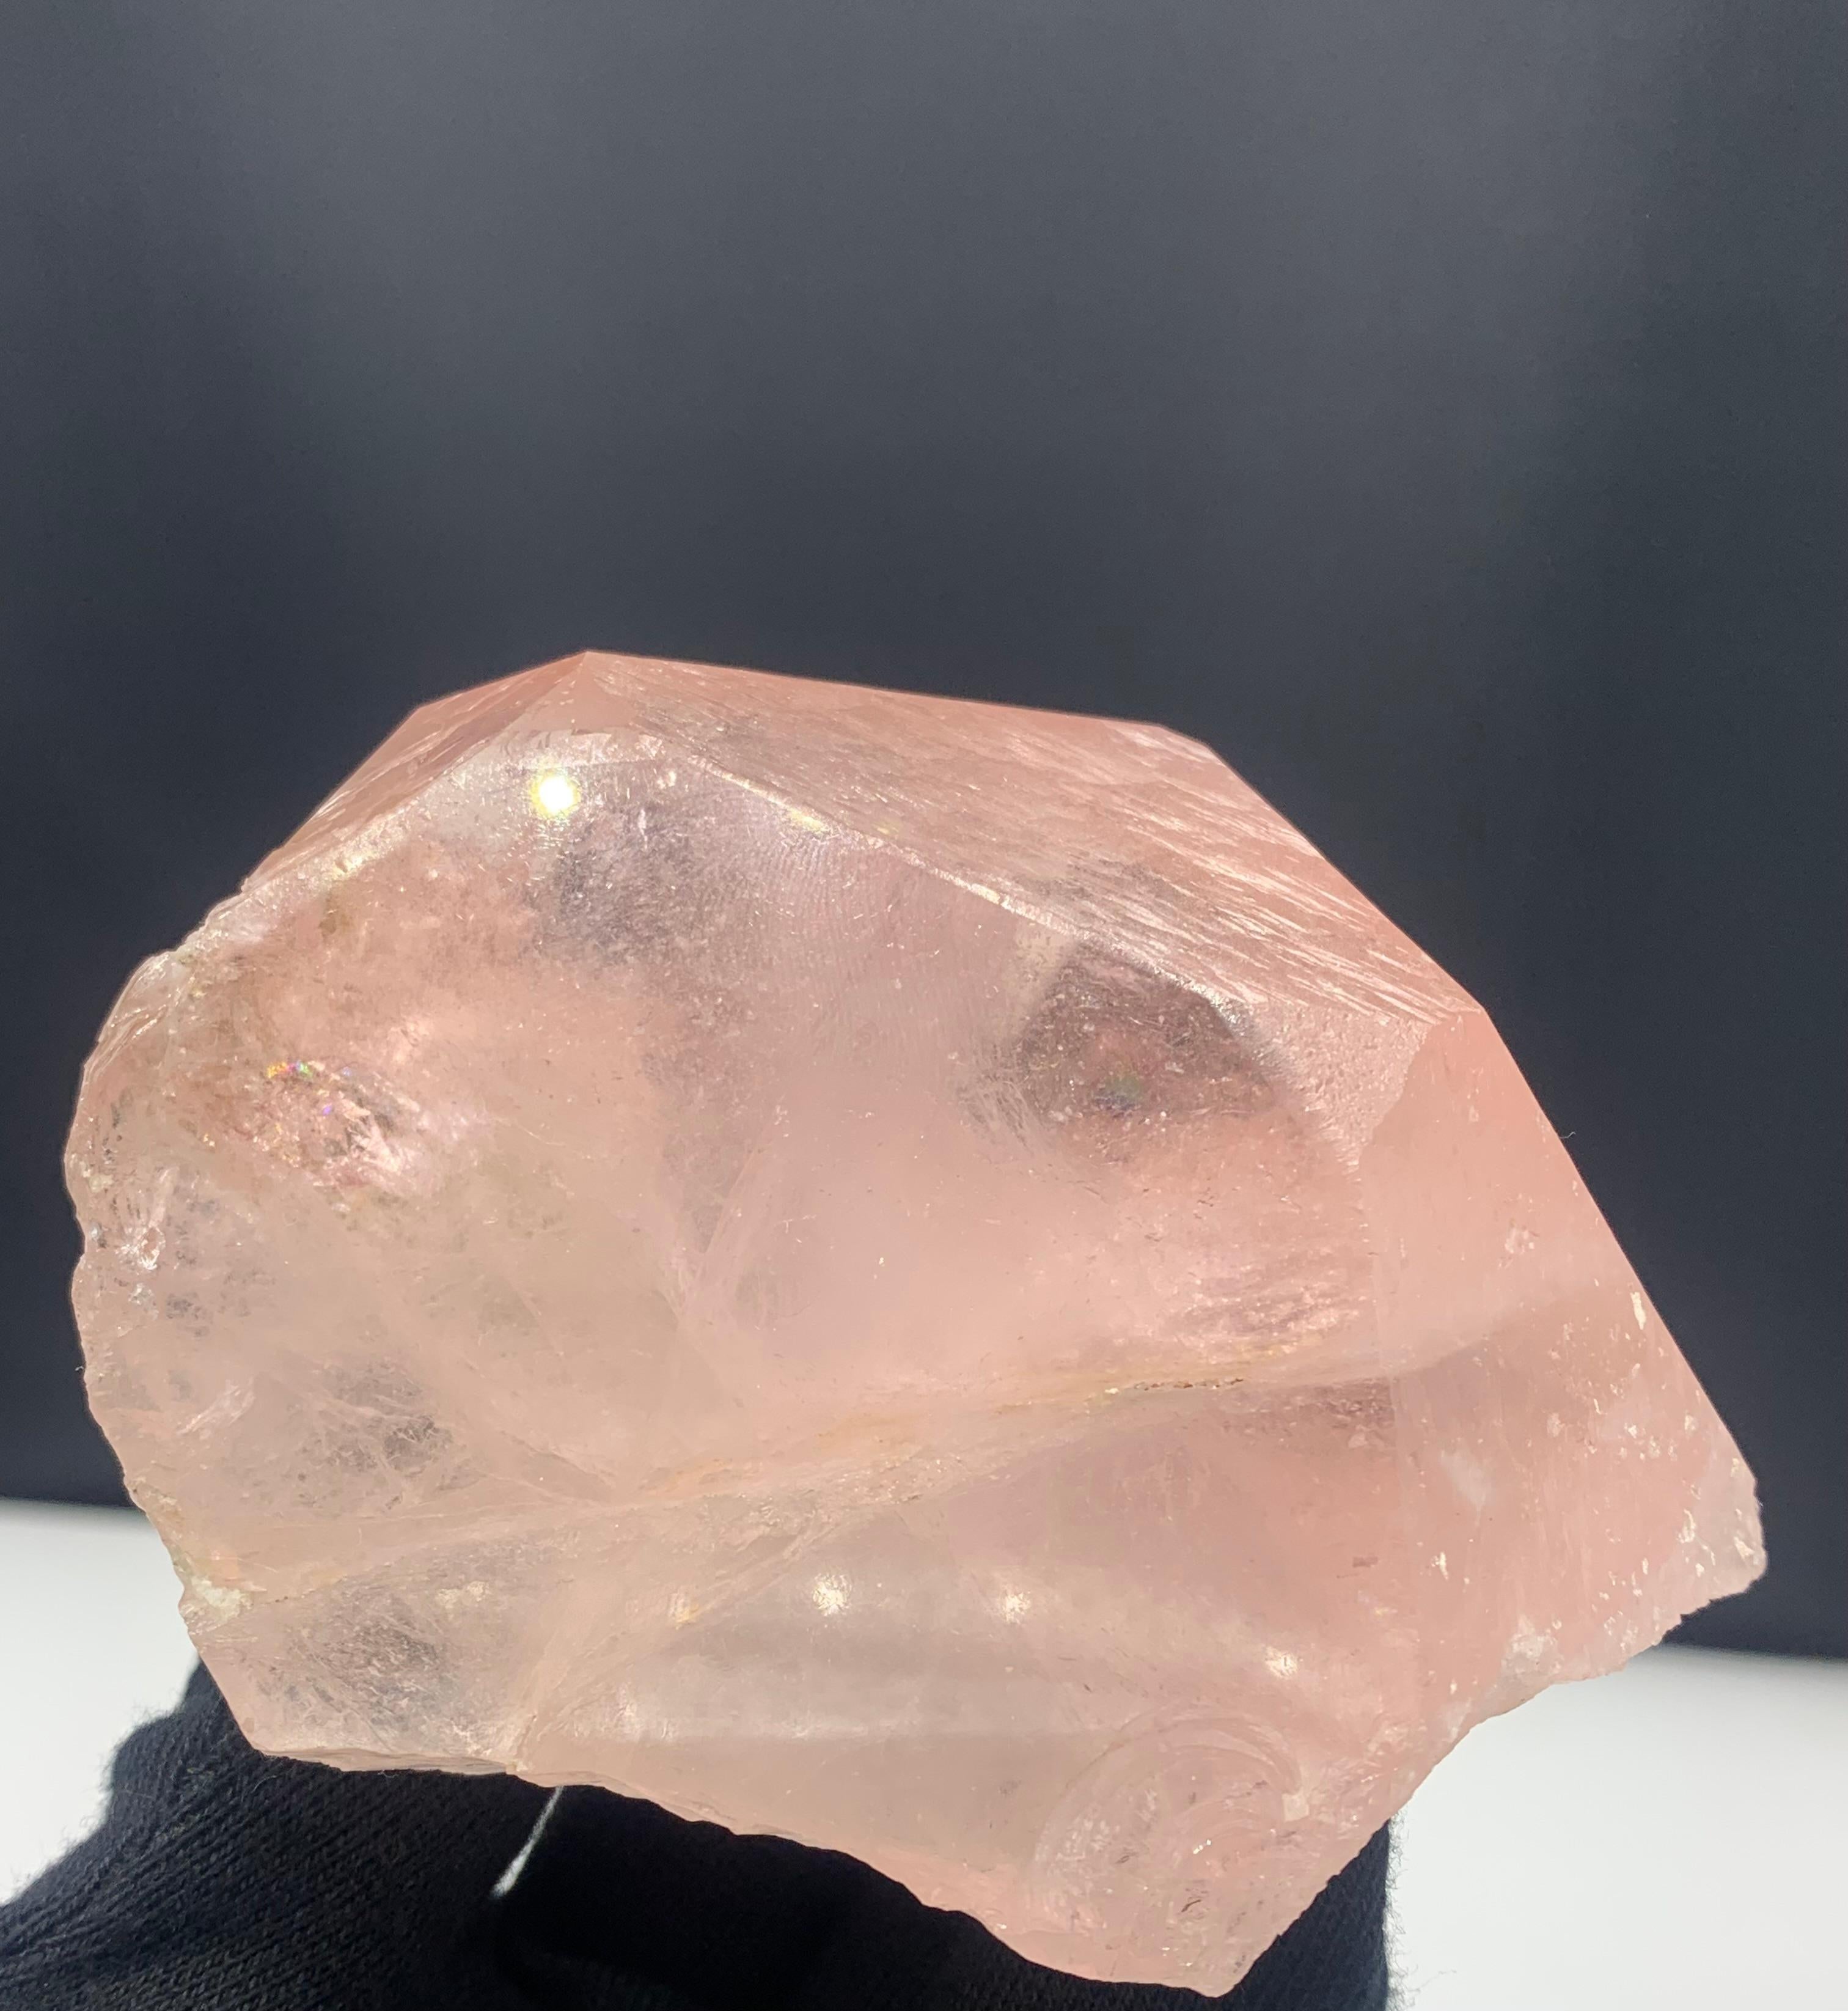 437.51 Gram Lovely Morganite Specimen With Muscovite From Kunar, Afghanistan 

Weight: 437.51 Gram 
Dimension: 8.5 x 10 x 5.1 Cm
Origin: Kunar, Afghanistan 

With its soft pinkish hue, morganite is often associated with innocence, sweetness, romance